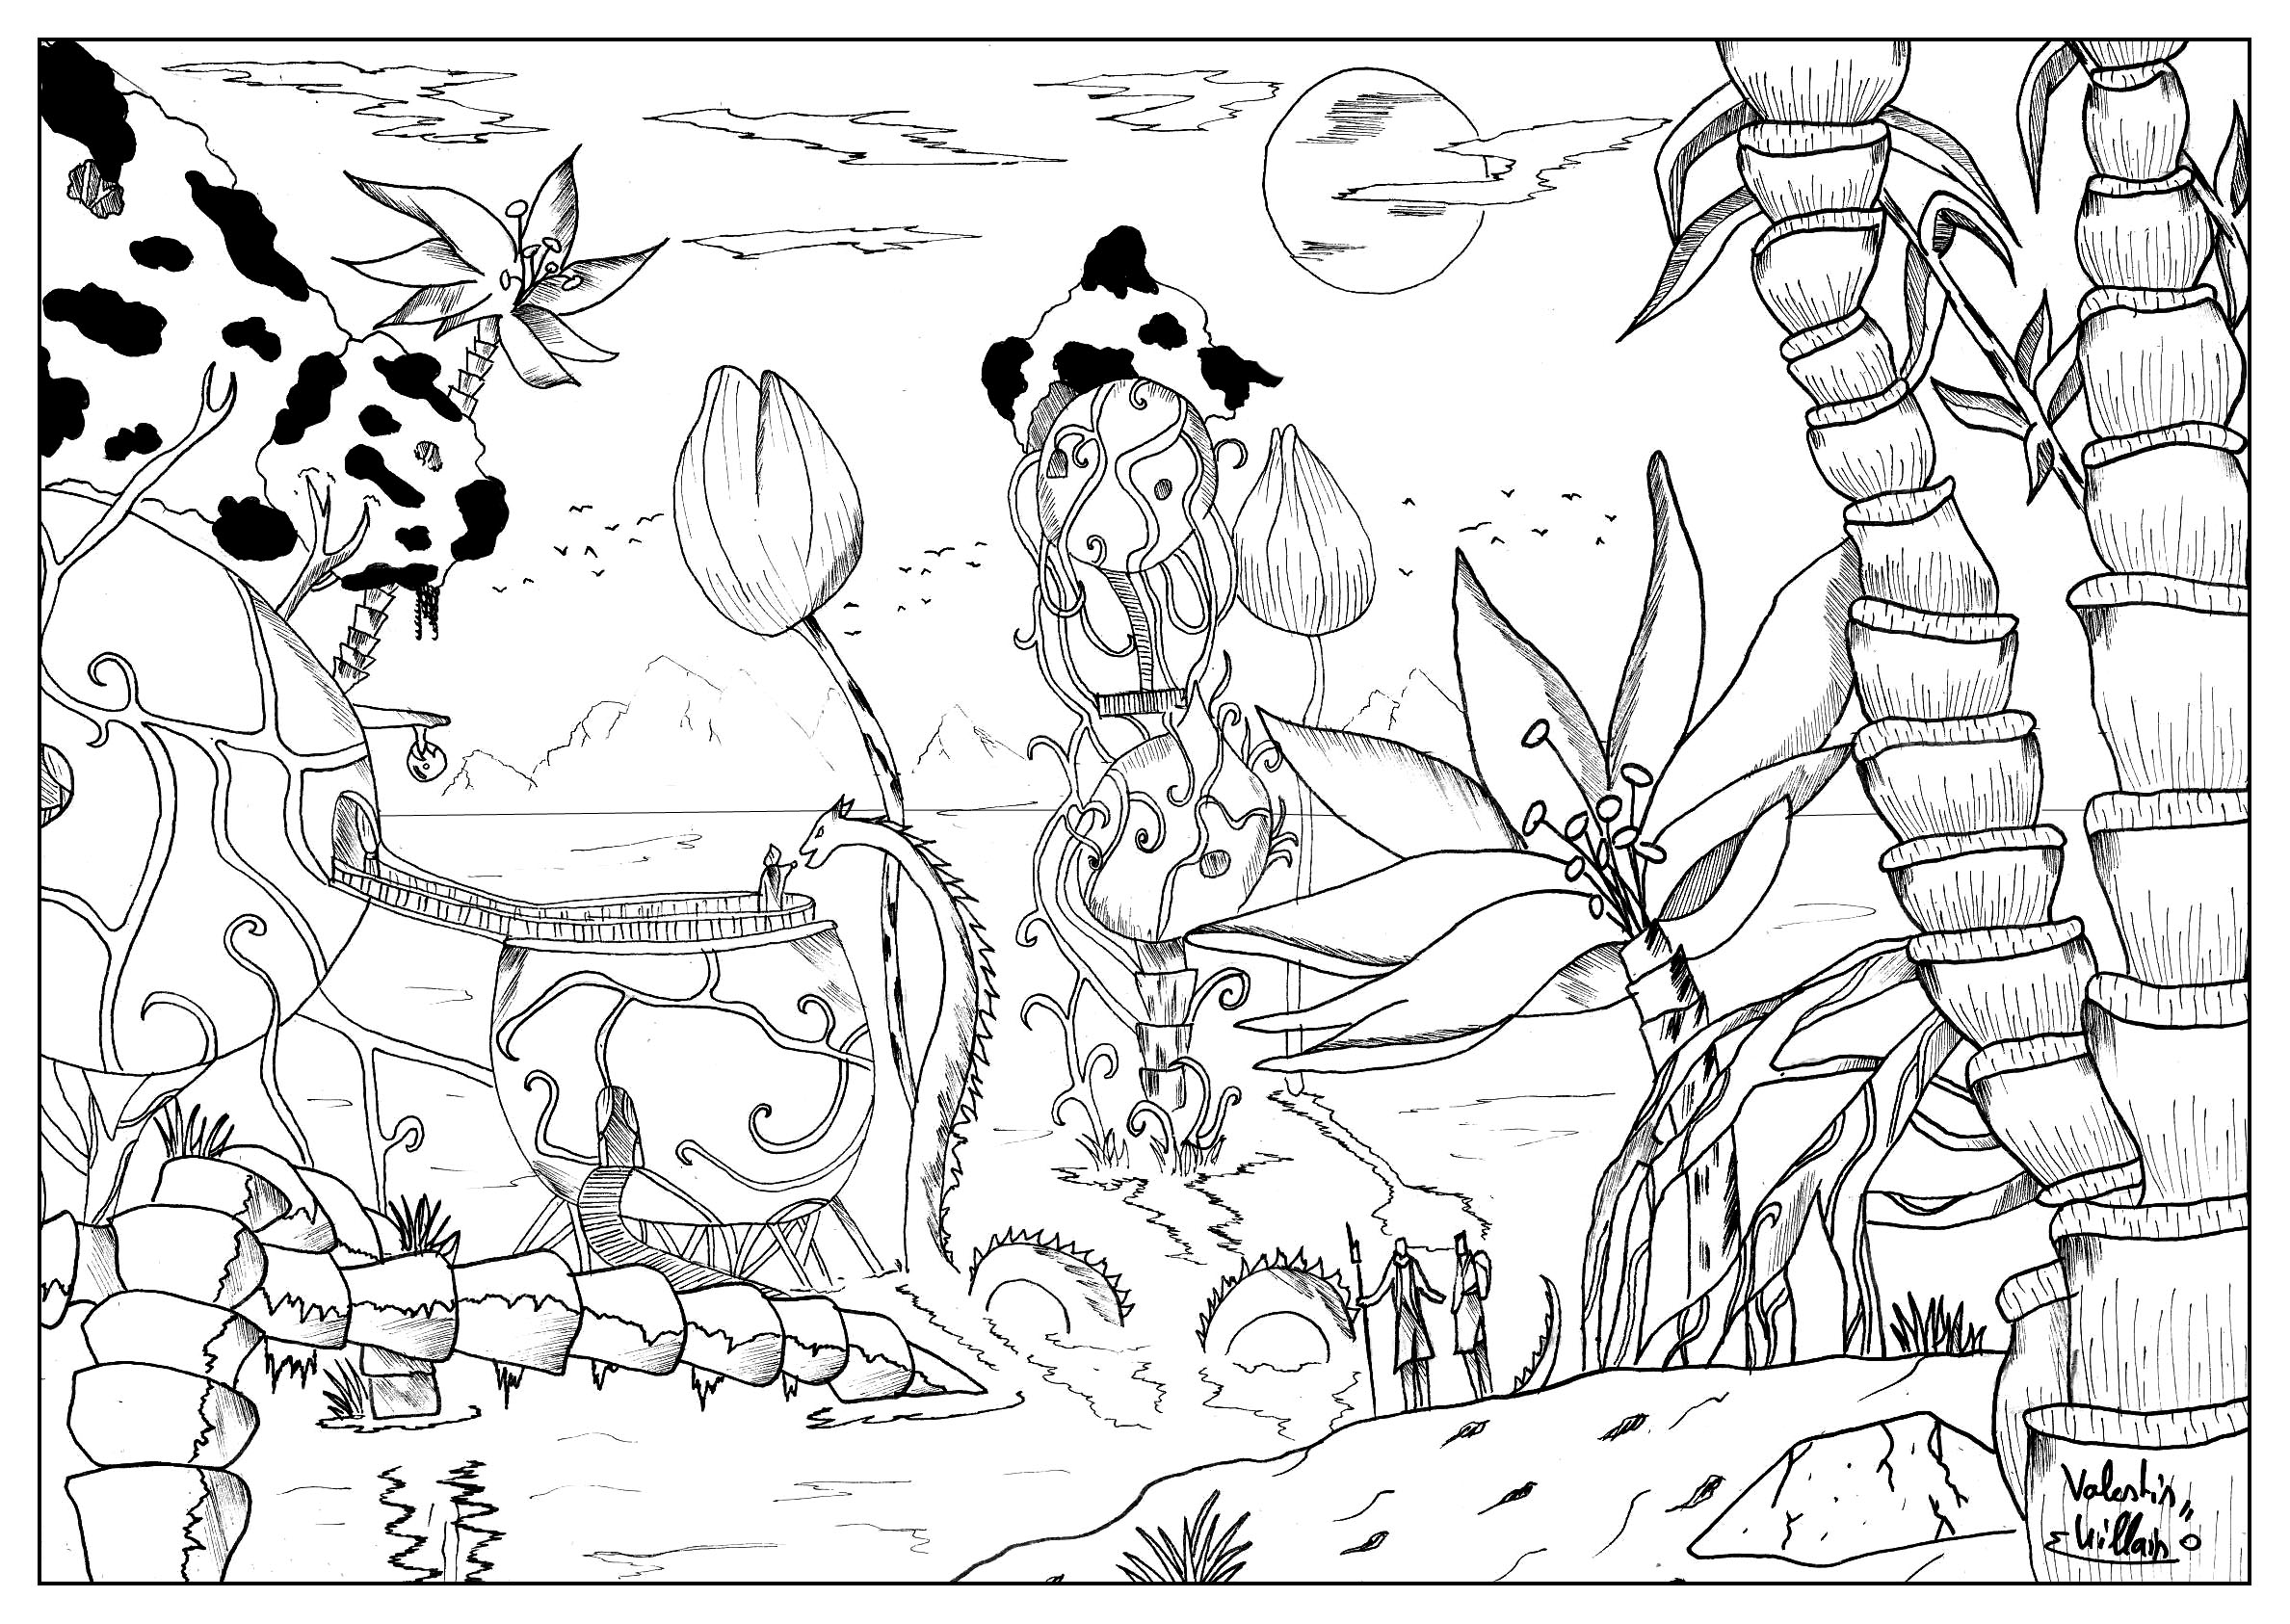 Coloring page of an imaginary aquatic village, with a strange creature and a mysterious character, Artist : Valentin